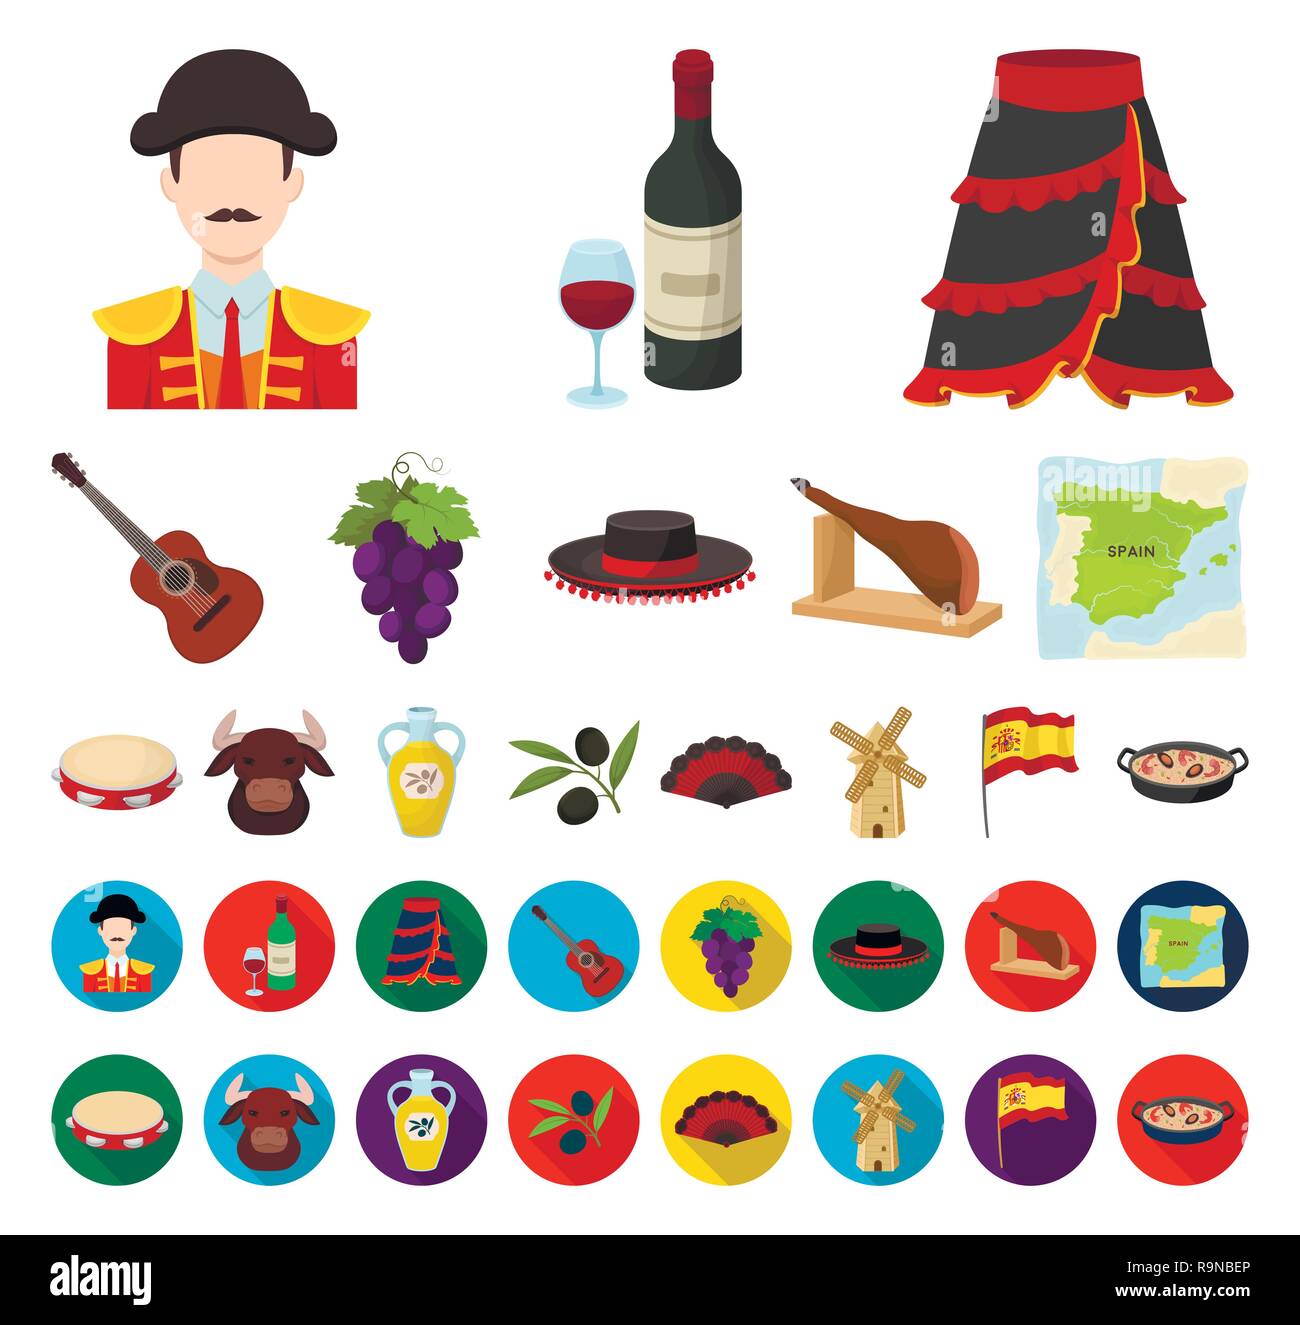 acoustic,art,attraction,bottle,branch,bull,bunch,cartoon,flat,collection,country,culture,design,fan,flag,flamenco,glass,grapes,guitar,hat,head,icon,illustration,isolated,jamon,journey,logo,matador,mill,oil,olive,olives,paella,population,set,showplace,sight,sign,skirt,spain,spanish,symbol,tambourine,territory,tourism,traditional,traditions,traveling,vector,web,wine Vector Vectors , Stock Vector